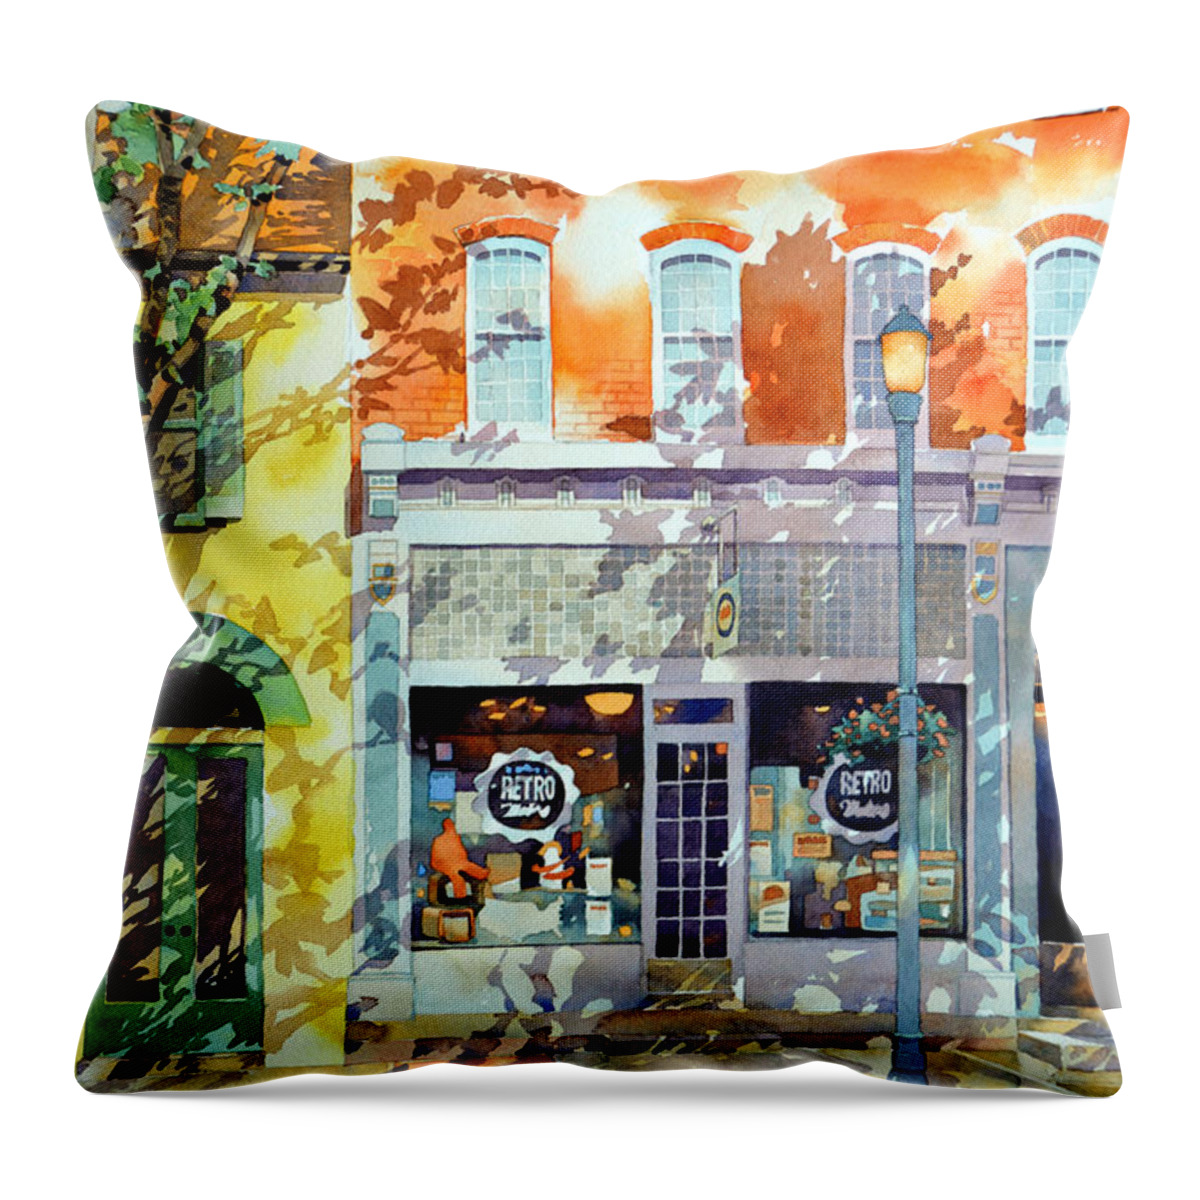 Watercolor Throw Pillow featuring the painting Novelties by Mick Williams